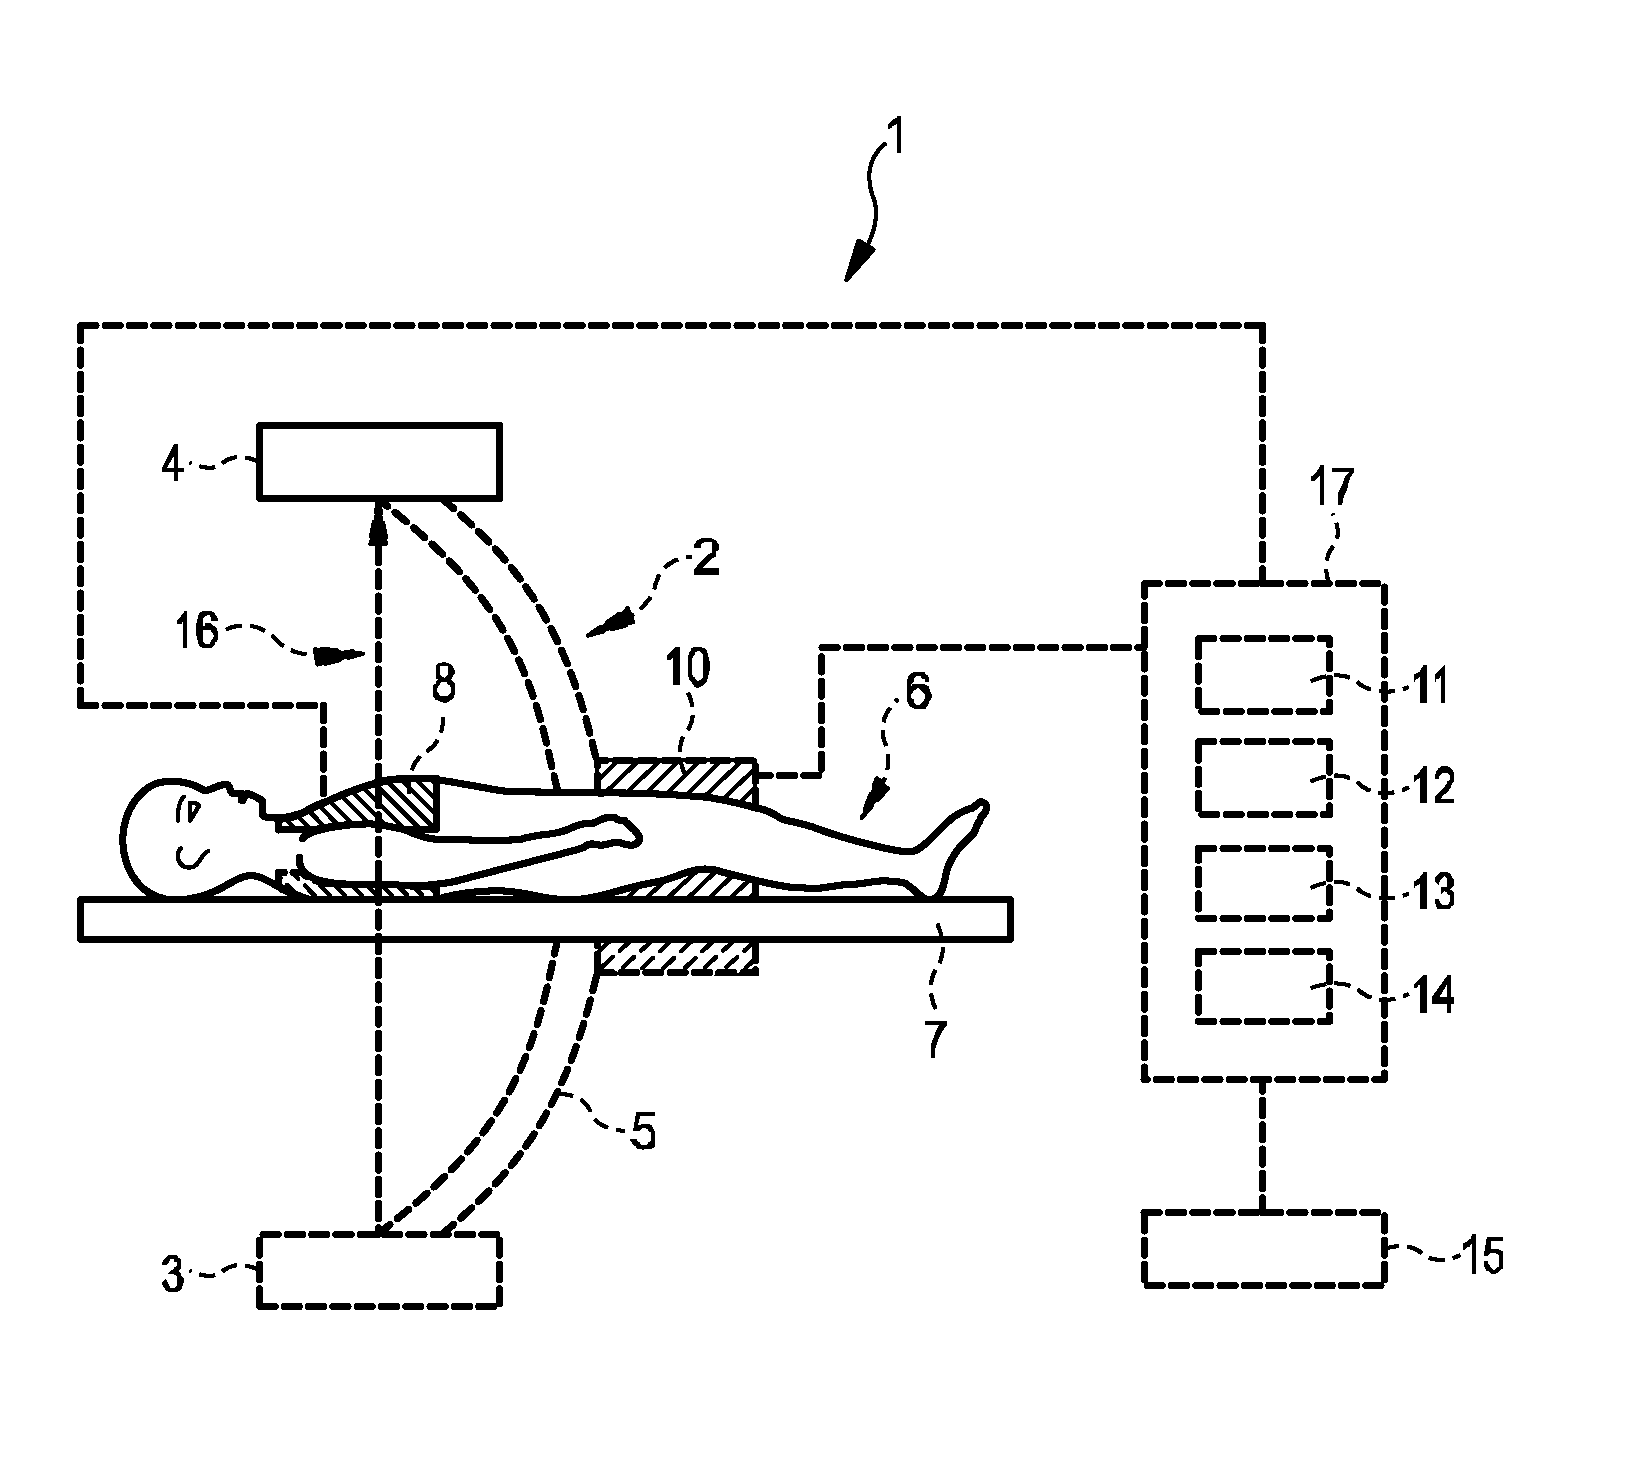 System for providing an electrical activity map